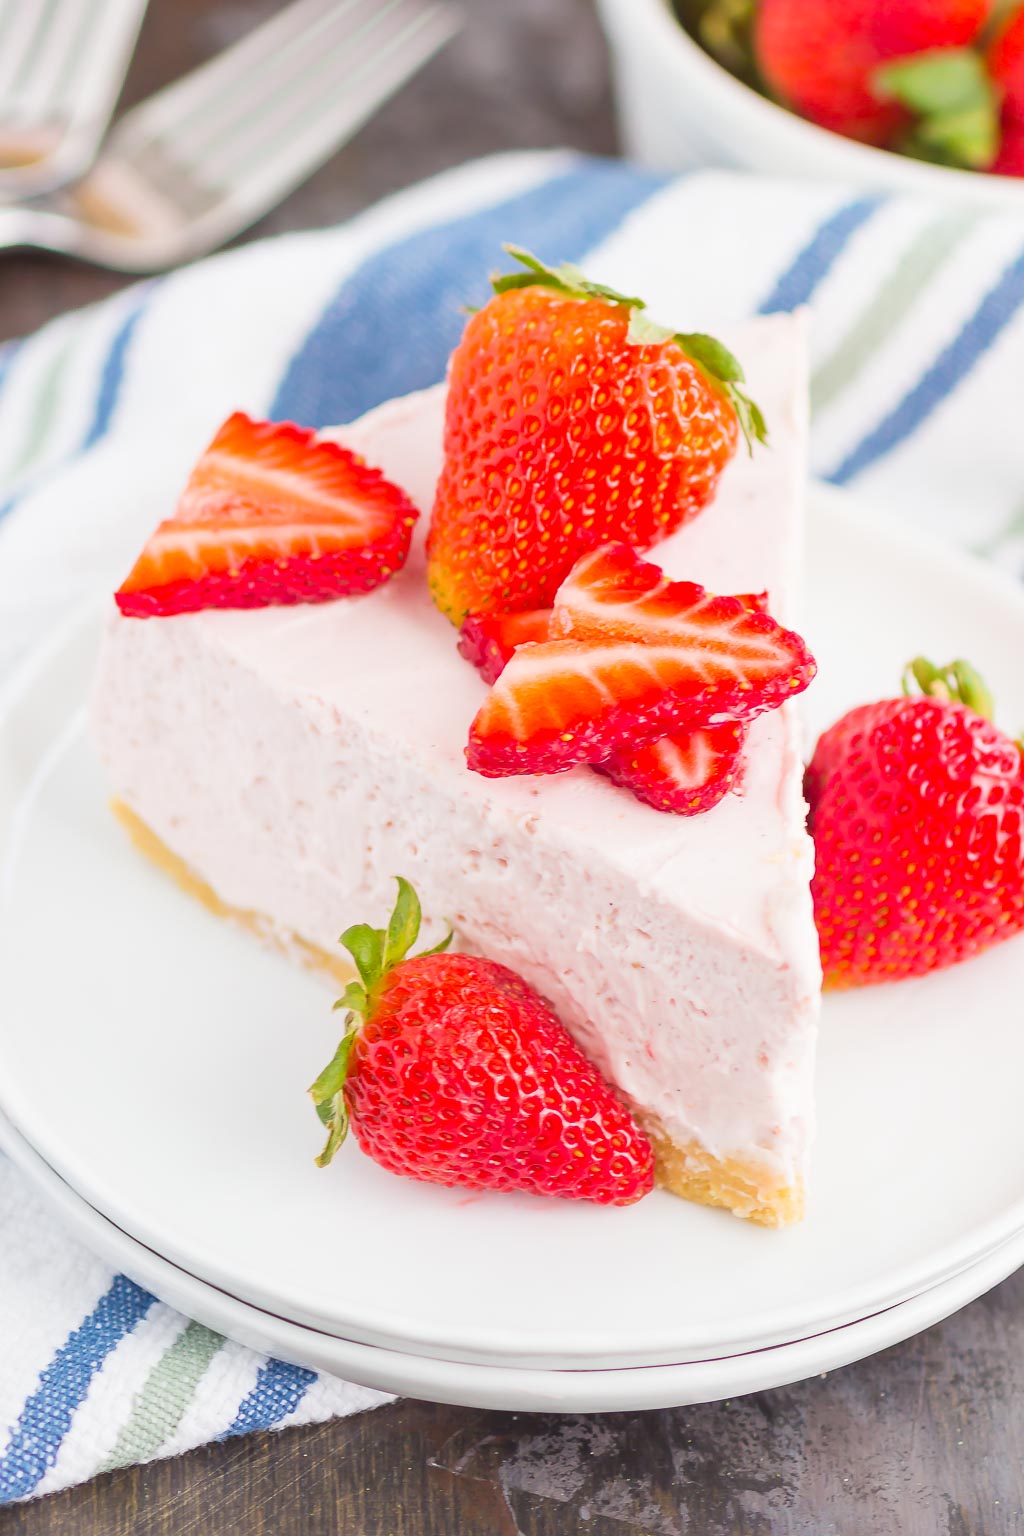 No Bake Strawberry Cheesecake is a simple dessert that's perfect for summer. A golden cookie crust is topped with a creamy strawberry cheesecake filling and then chilled to perfection. Easy to make and with no oven required, this decadent cake makes the most delicious treat!